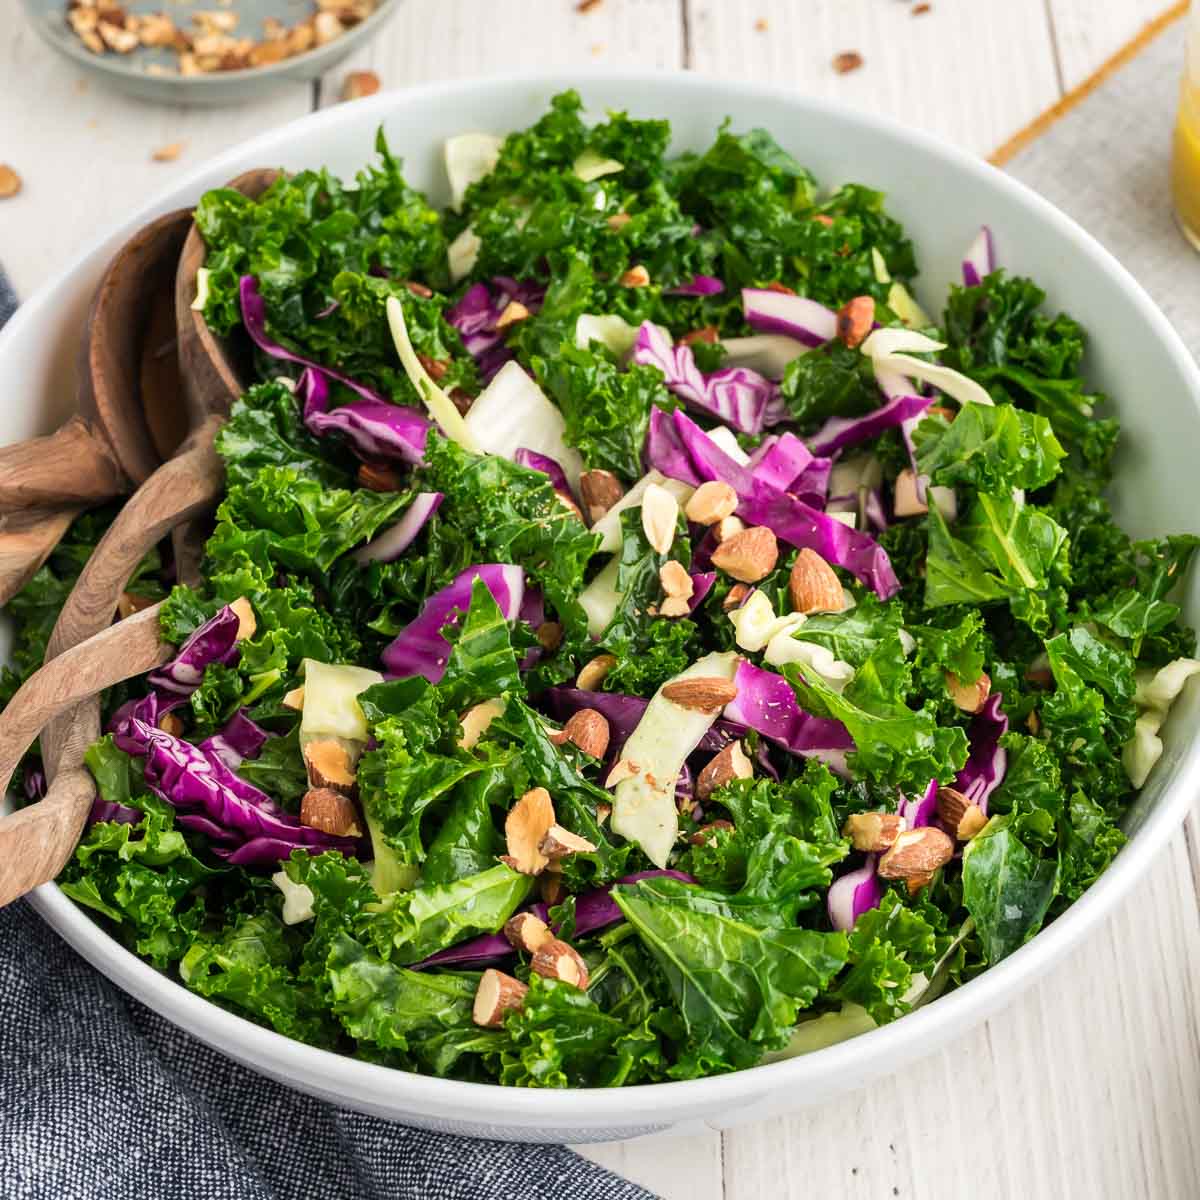 A kale crunch salad in a white bowl topped with toasted almonds.